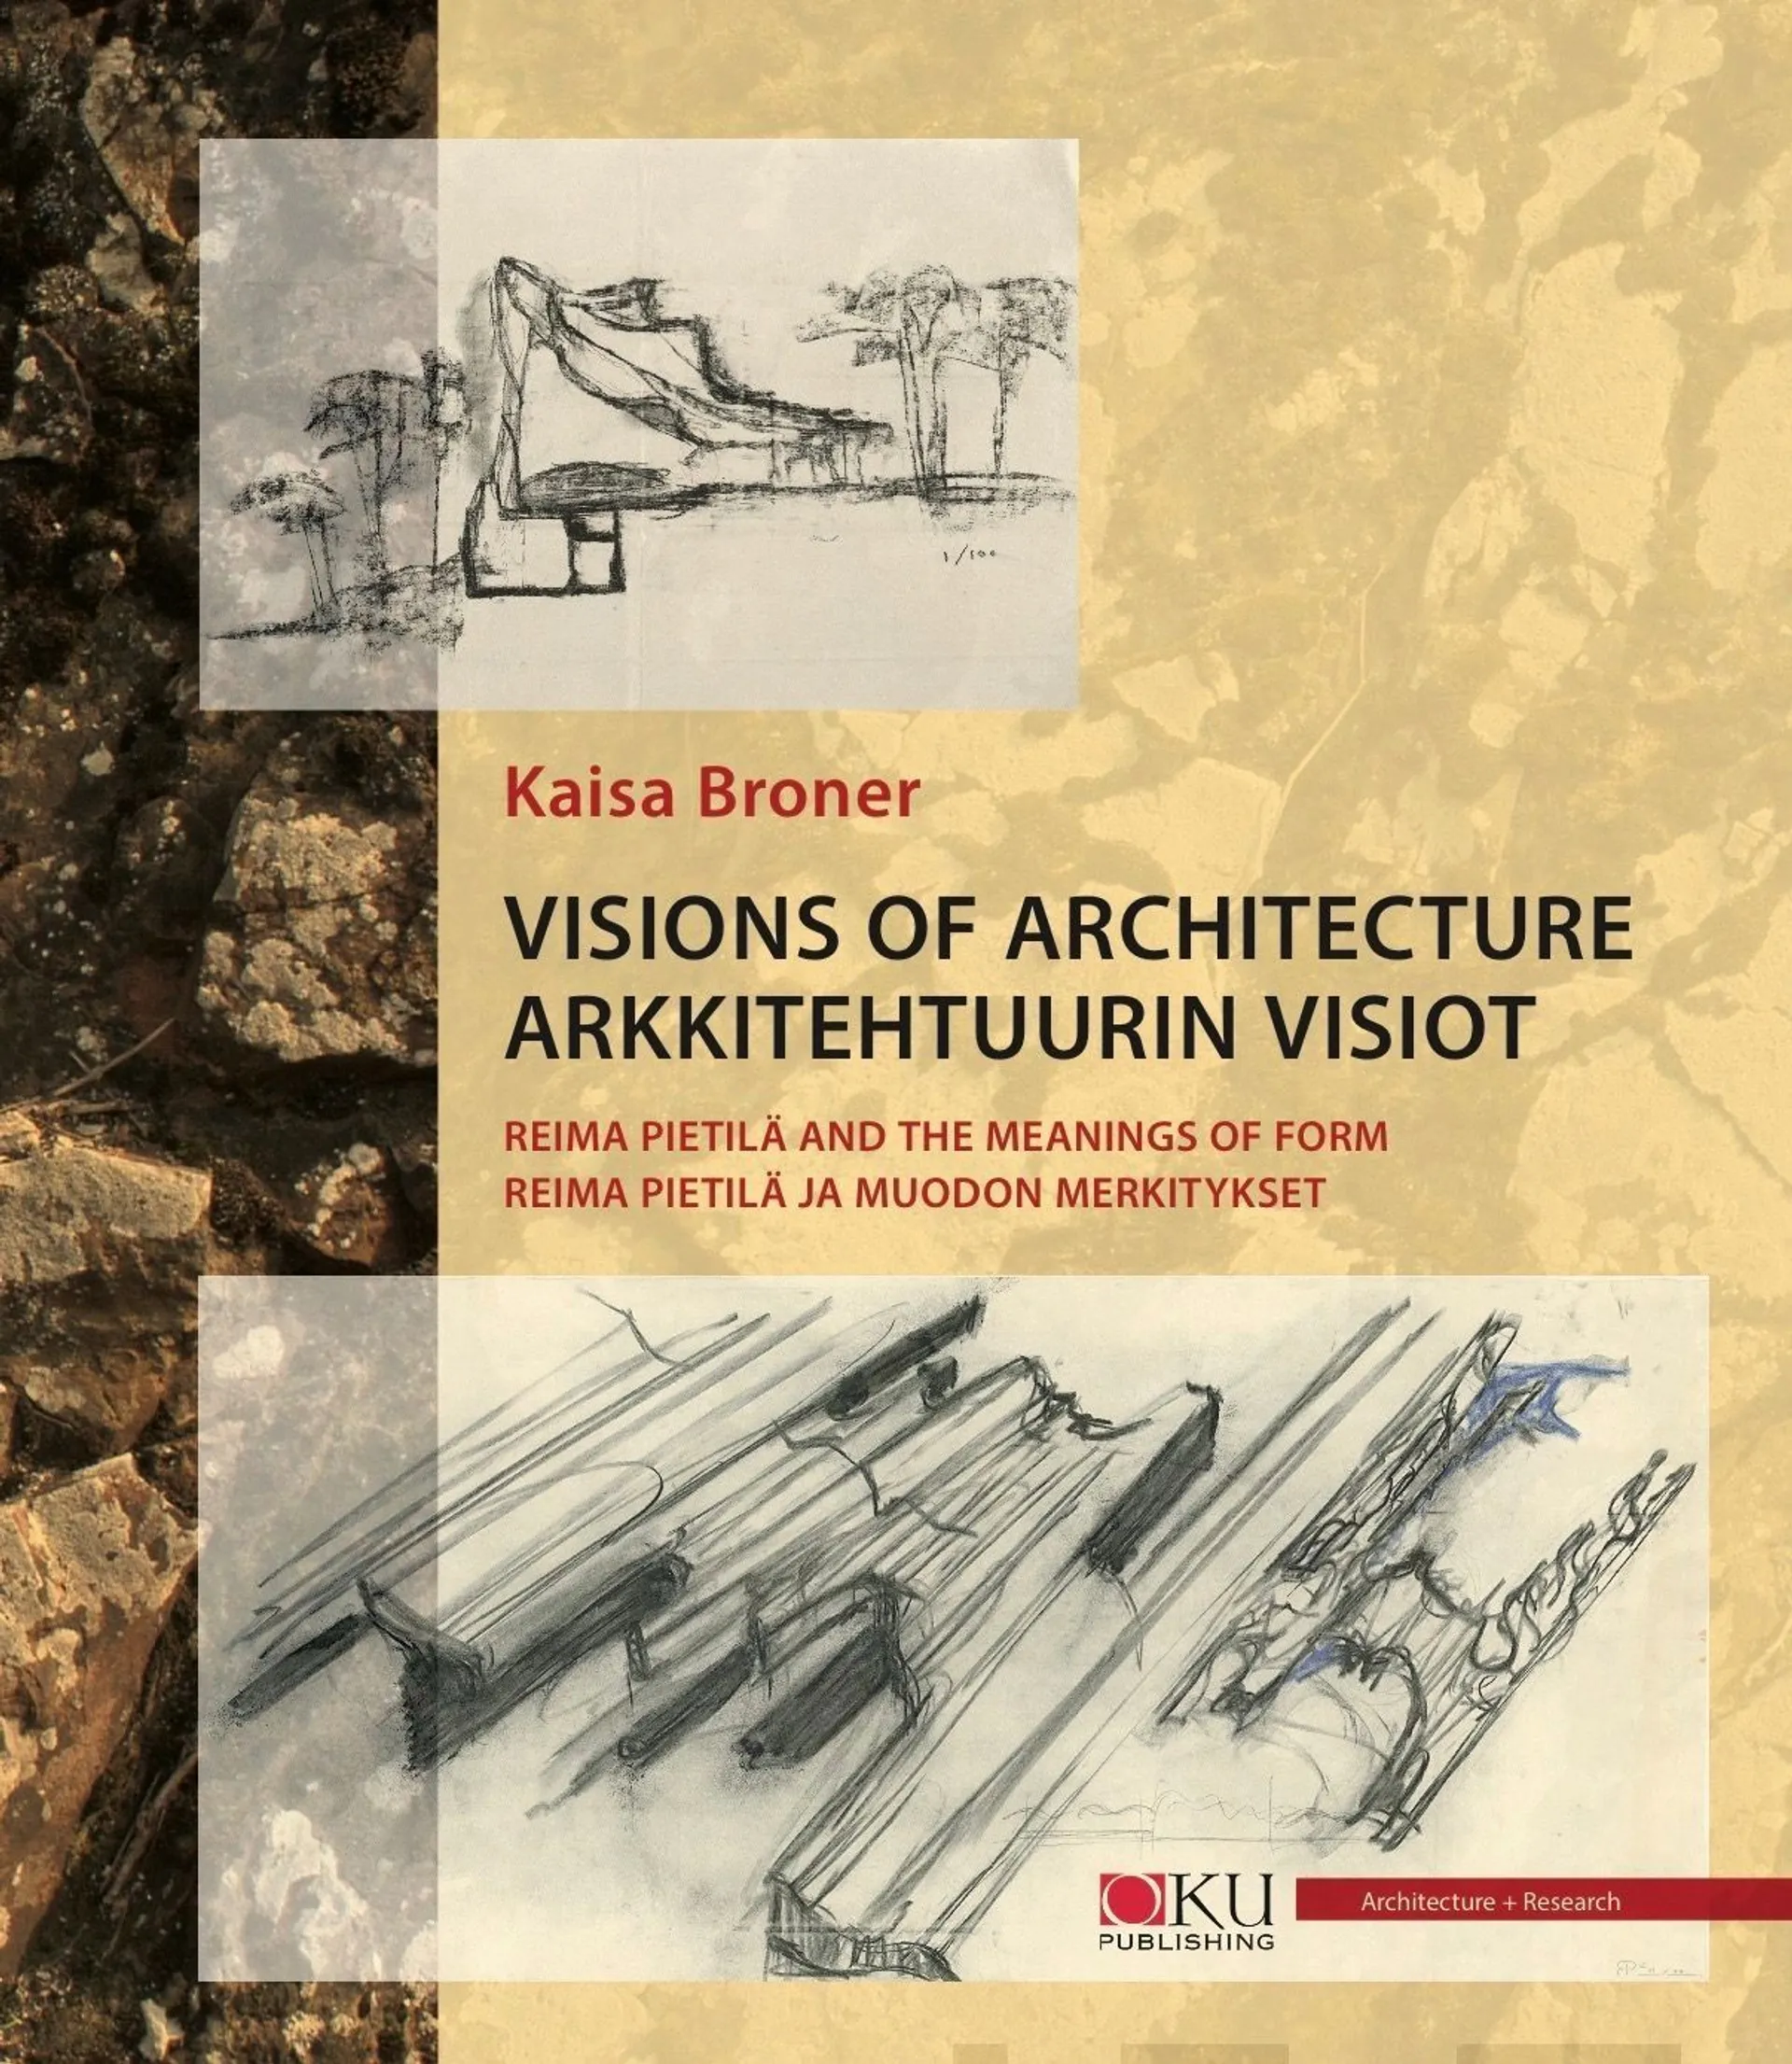 Broner, Arkkitehtuurin visiot - Visions of Architecture